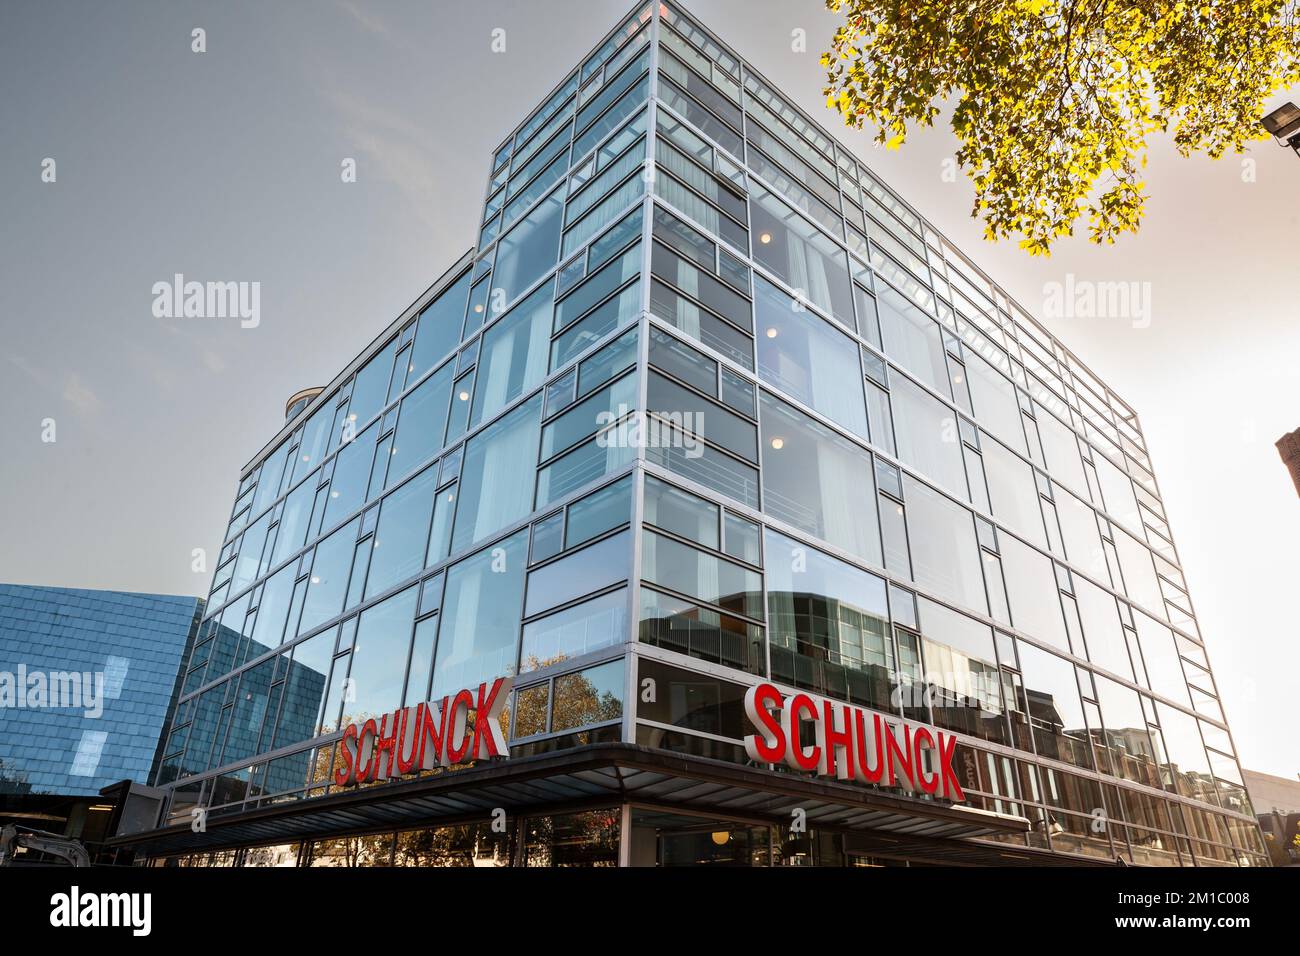 Picture of the Schunck Glaspaleis in Heerlen, Netherlands. Schunck is the name of former fashion house and department store Firma Schunck in Heerlen, Stock Photo